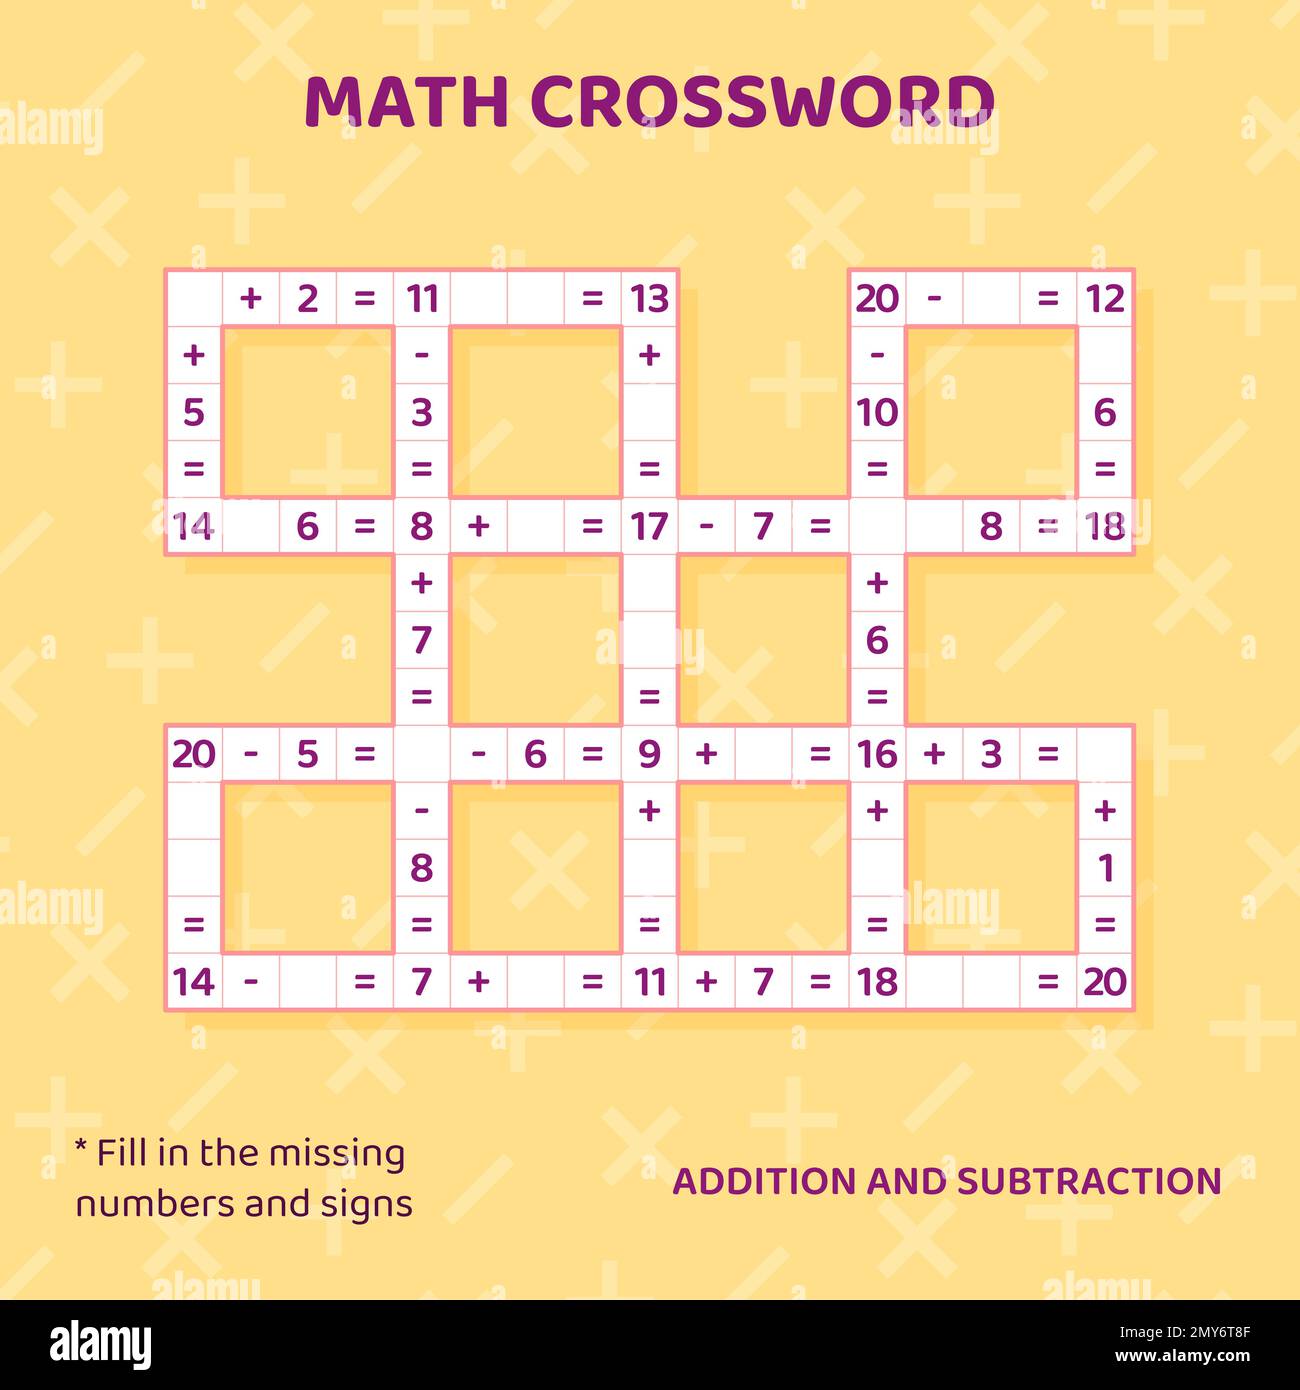 Math Crossword Puzzle For Children Addition And Subtraction 2MY6T8F 